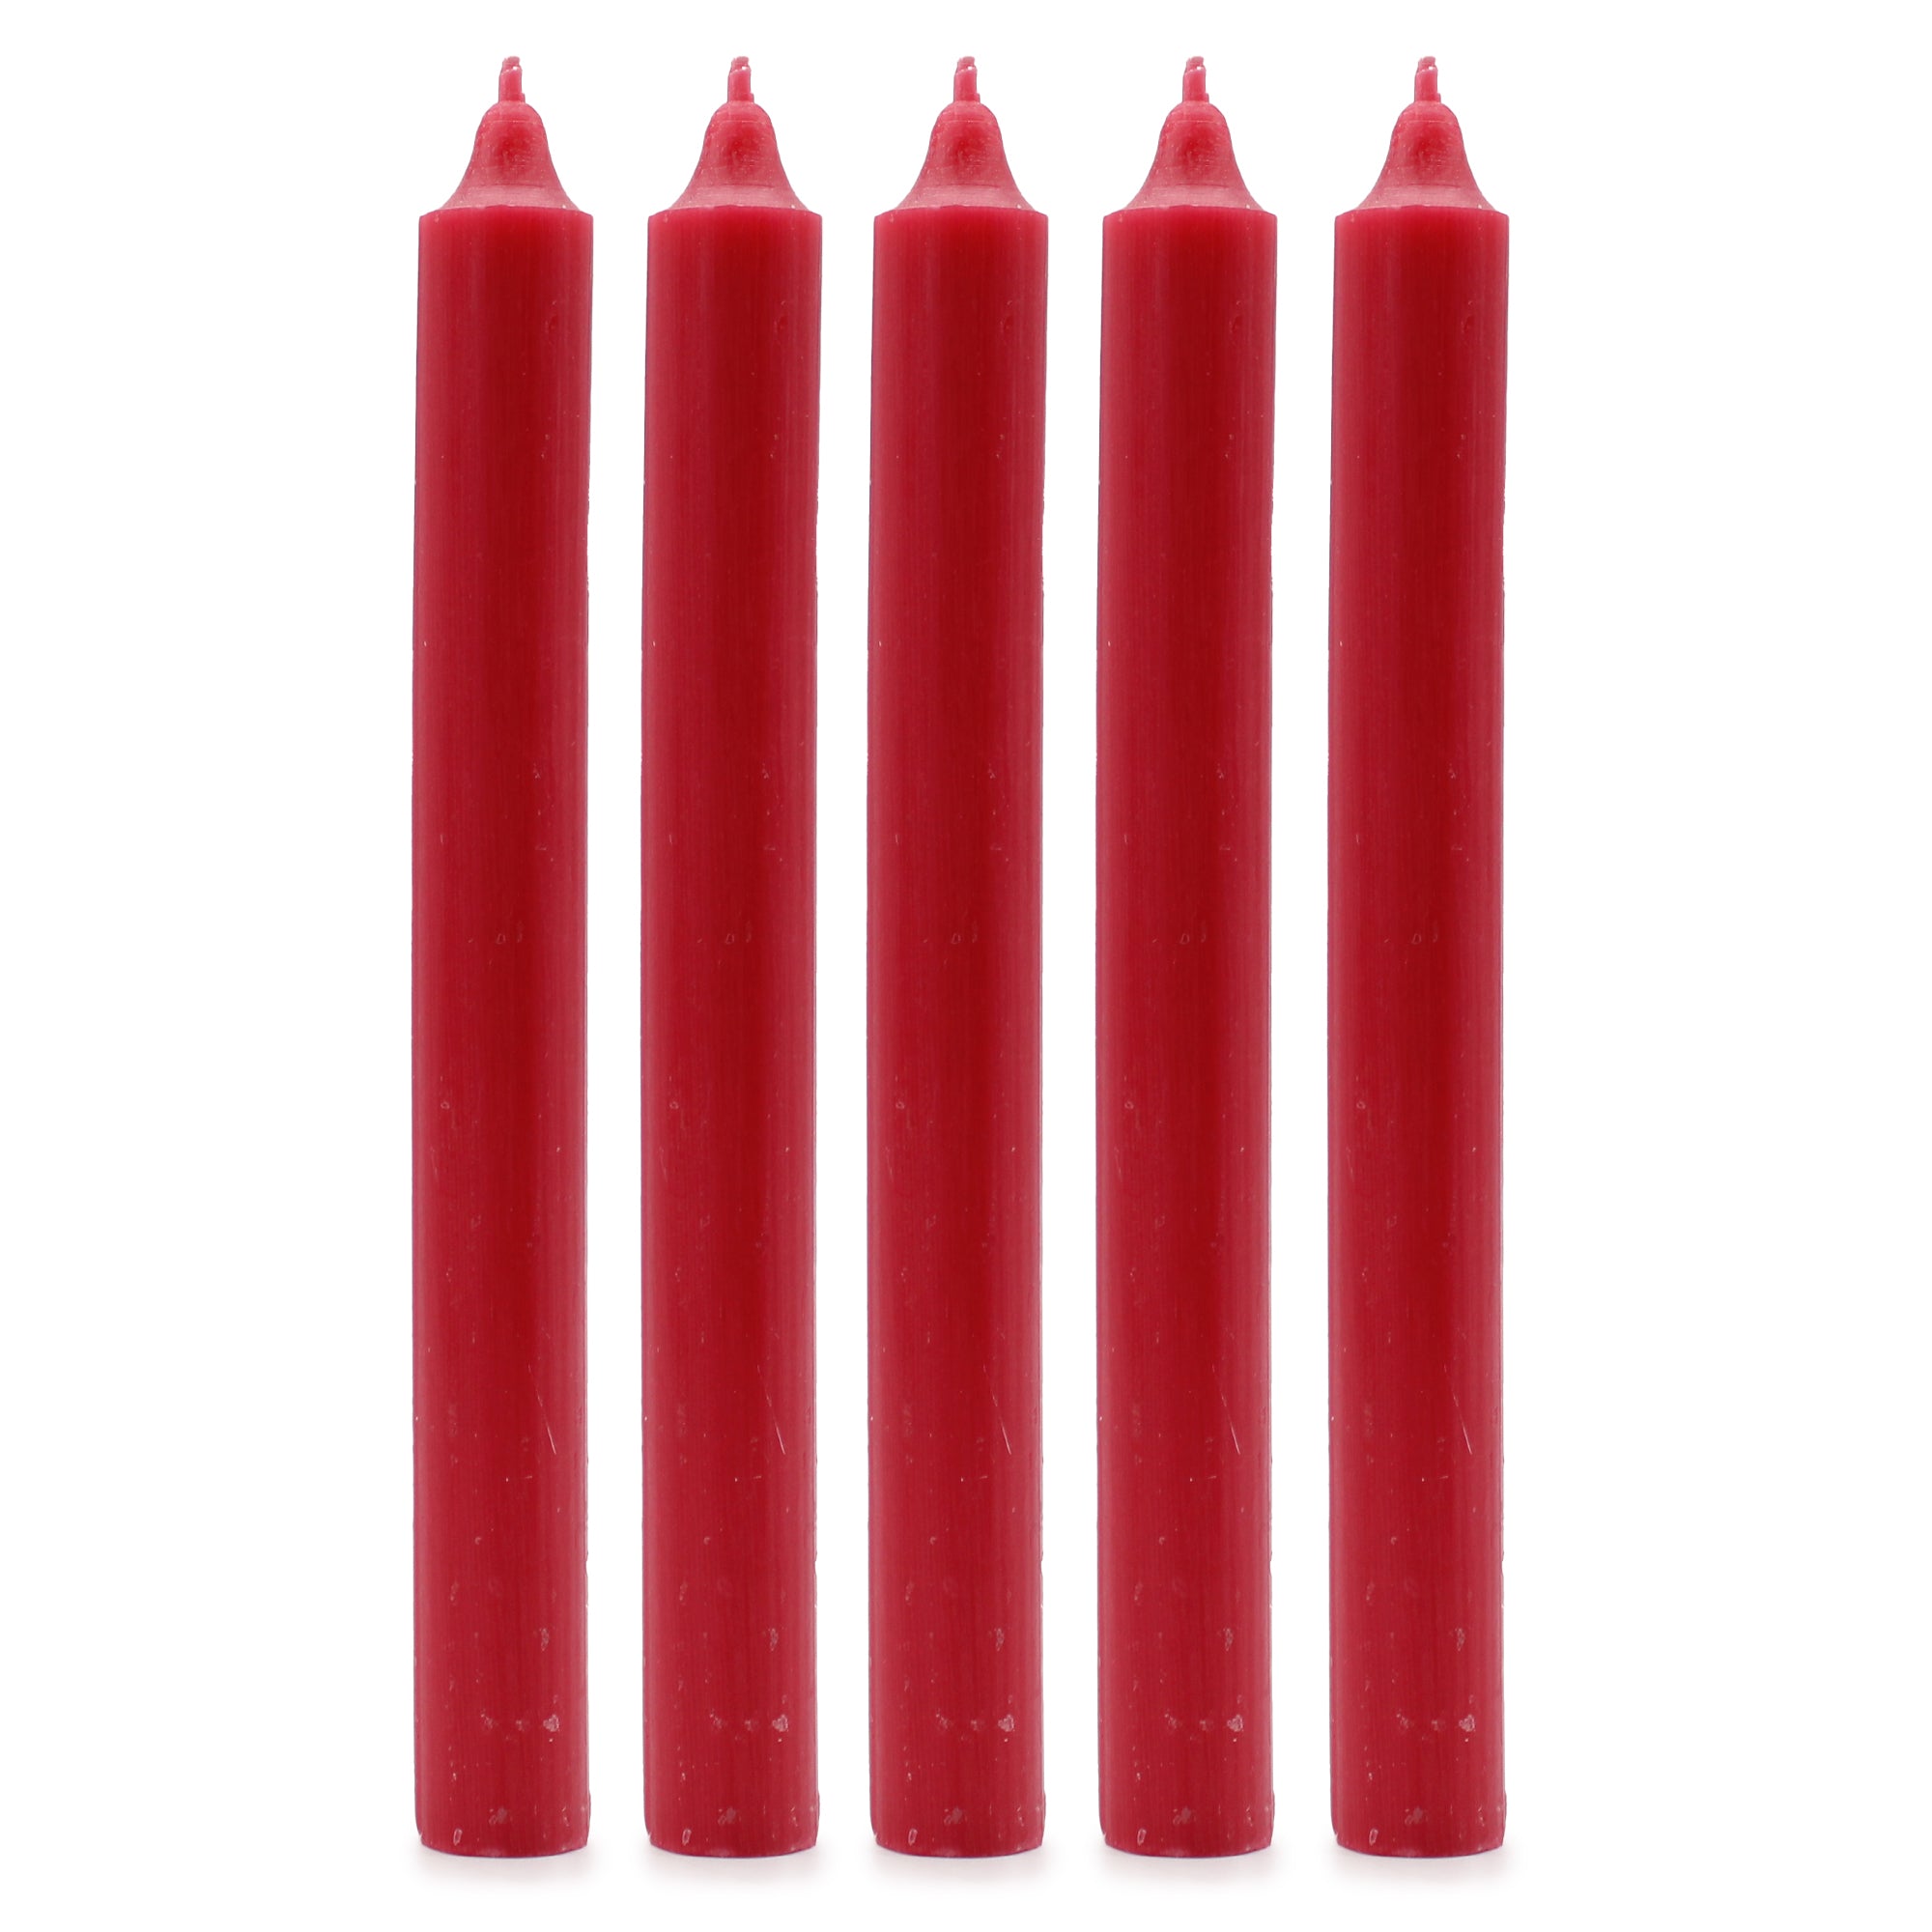 View Solid Colour Dinner Candles Rustic Red Pack of 5 information